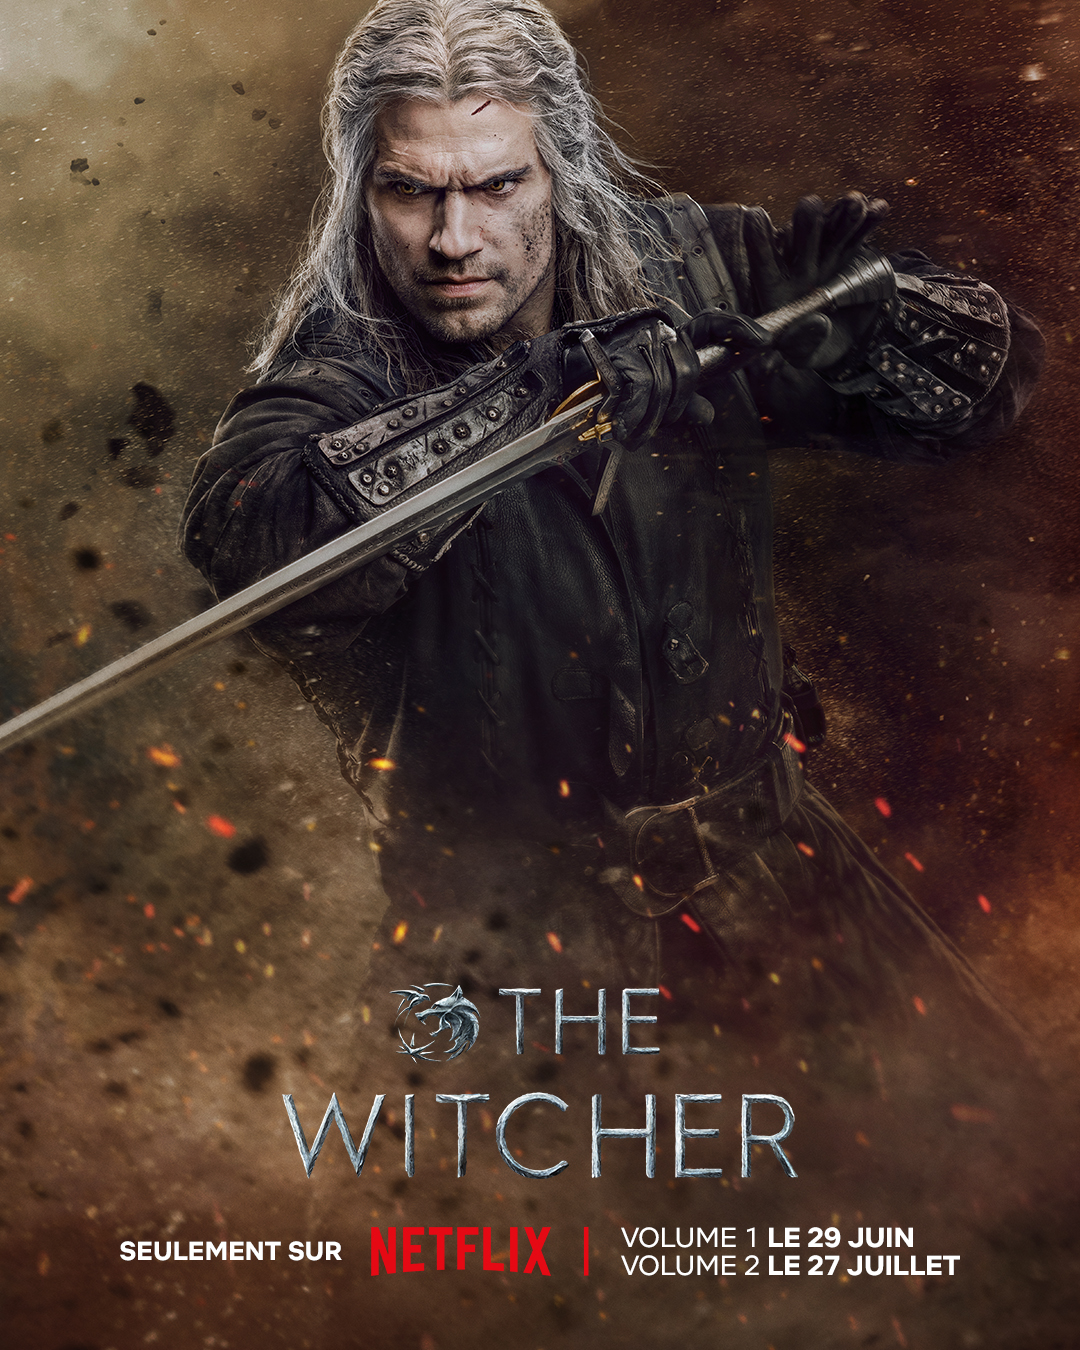 Série "The Witcher" - Page 3 FyB3bukWIAA7gRY?format=jpg&name=large